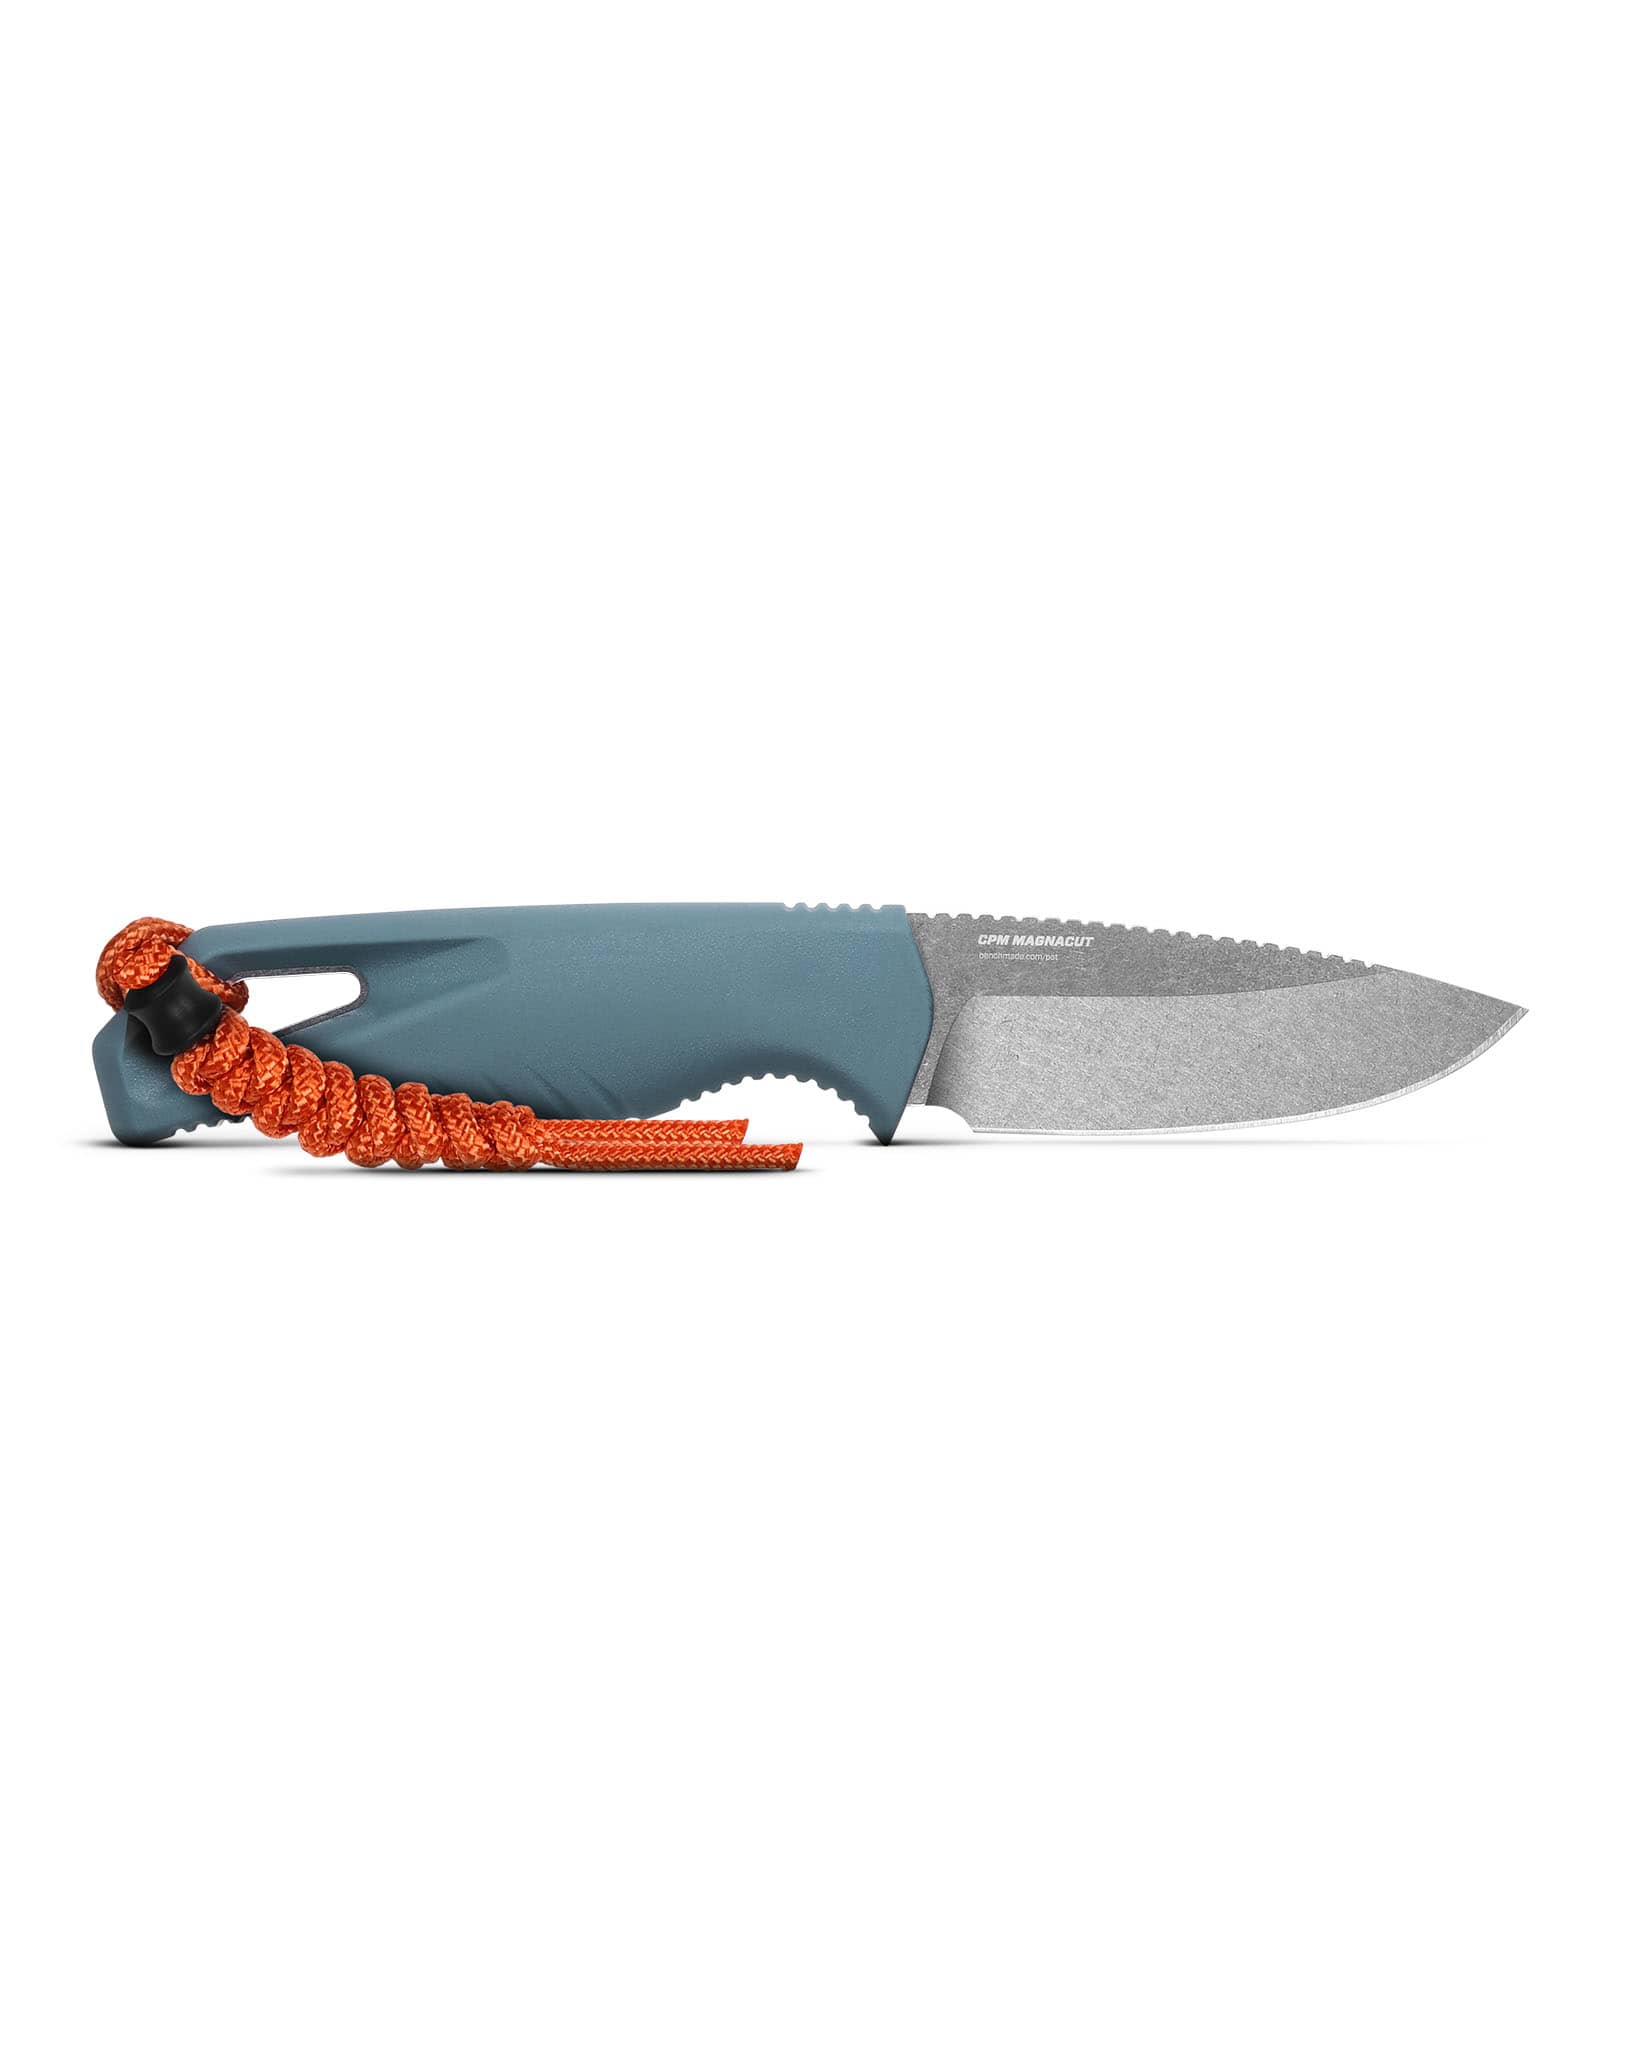 Benchmade® 18050 Intersect Fixed Blade Knife